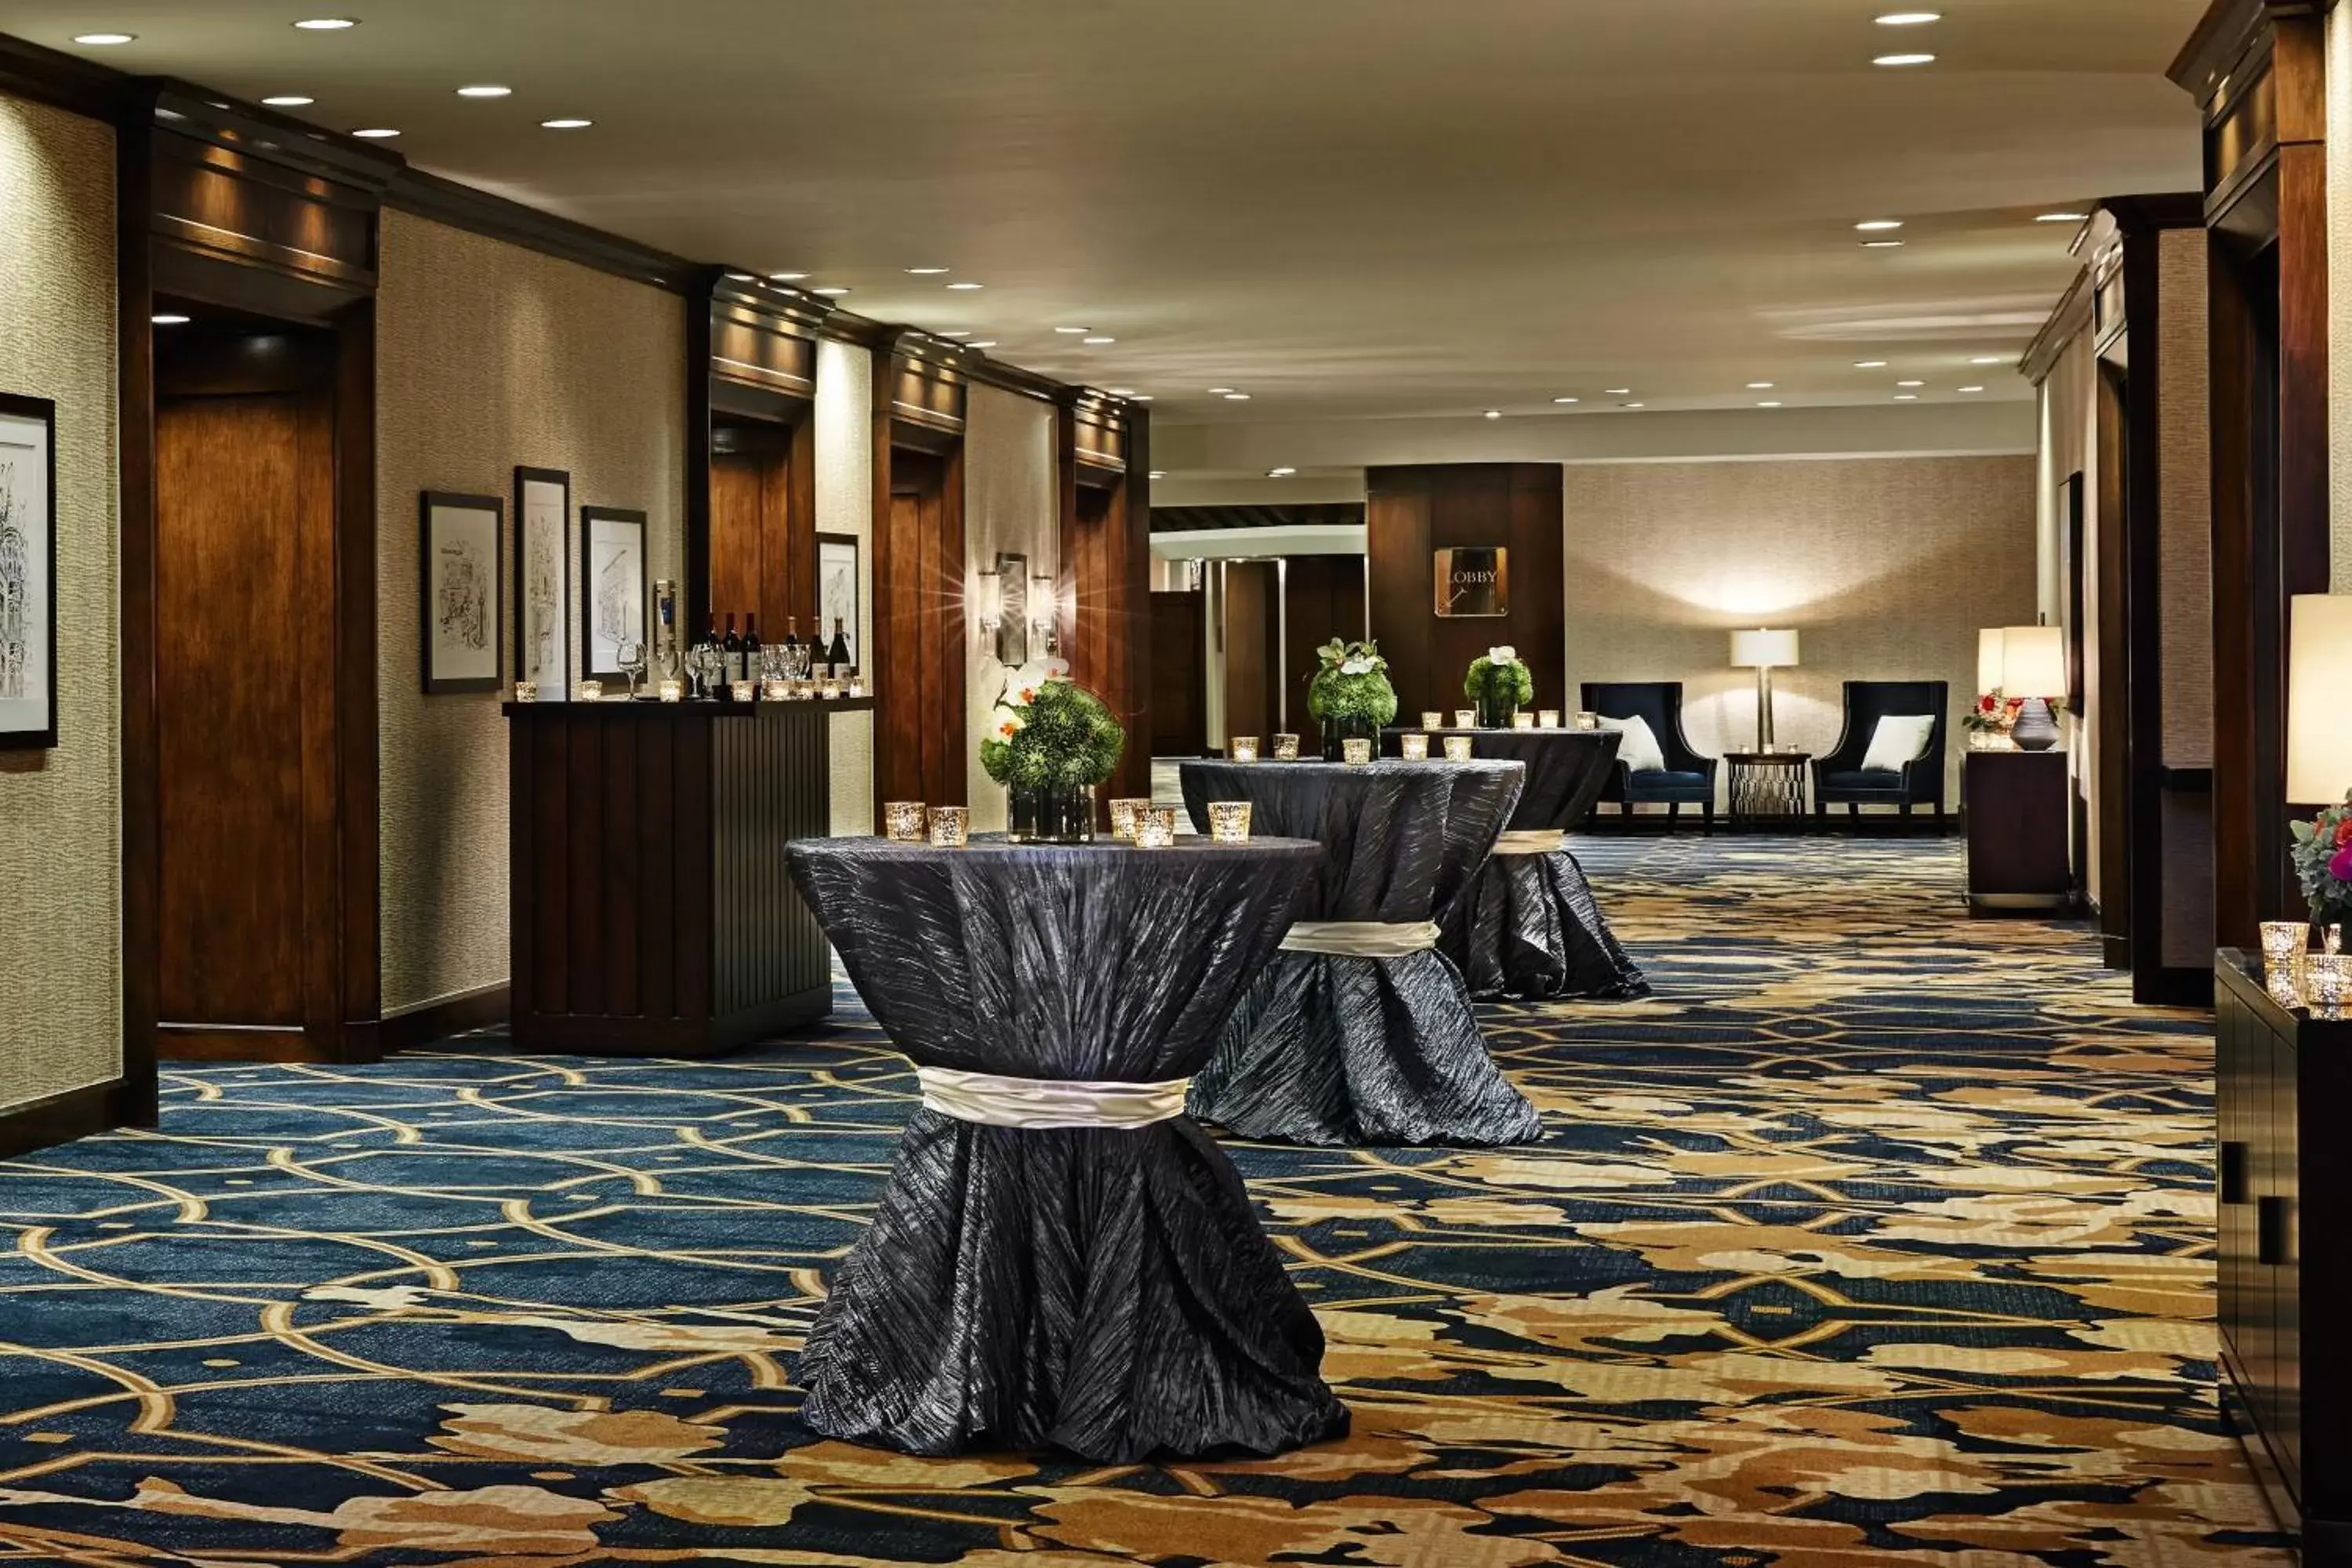 Meeting/conference room, Banquet Facilities in JW Marriott New Orleans